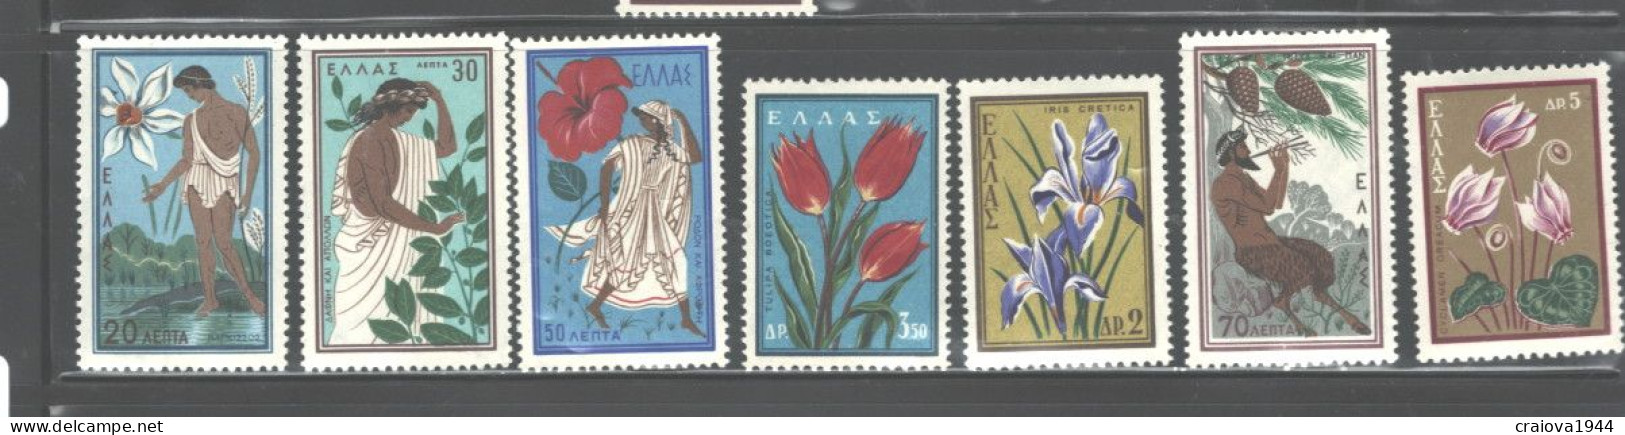 GREECE 1958, PROTECTION Of NATURE CONGRESS, ATHENS #624-631 MNH - Unused Stamps